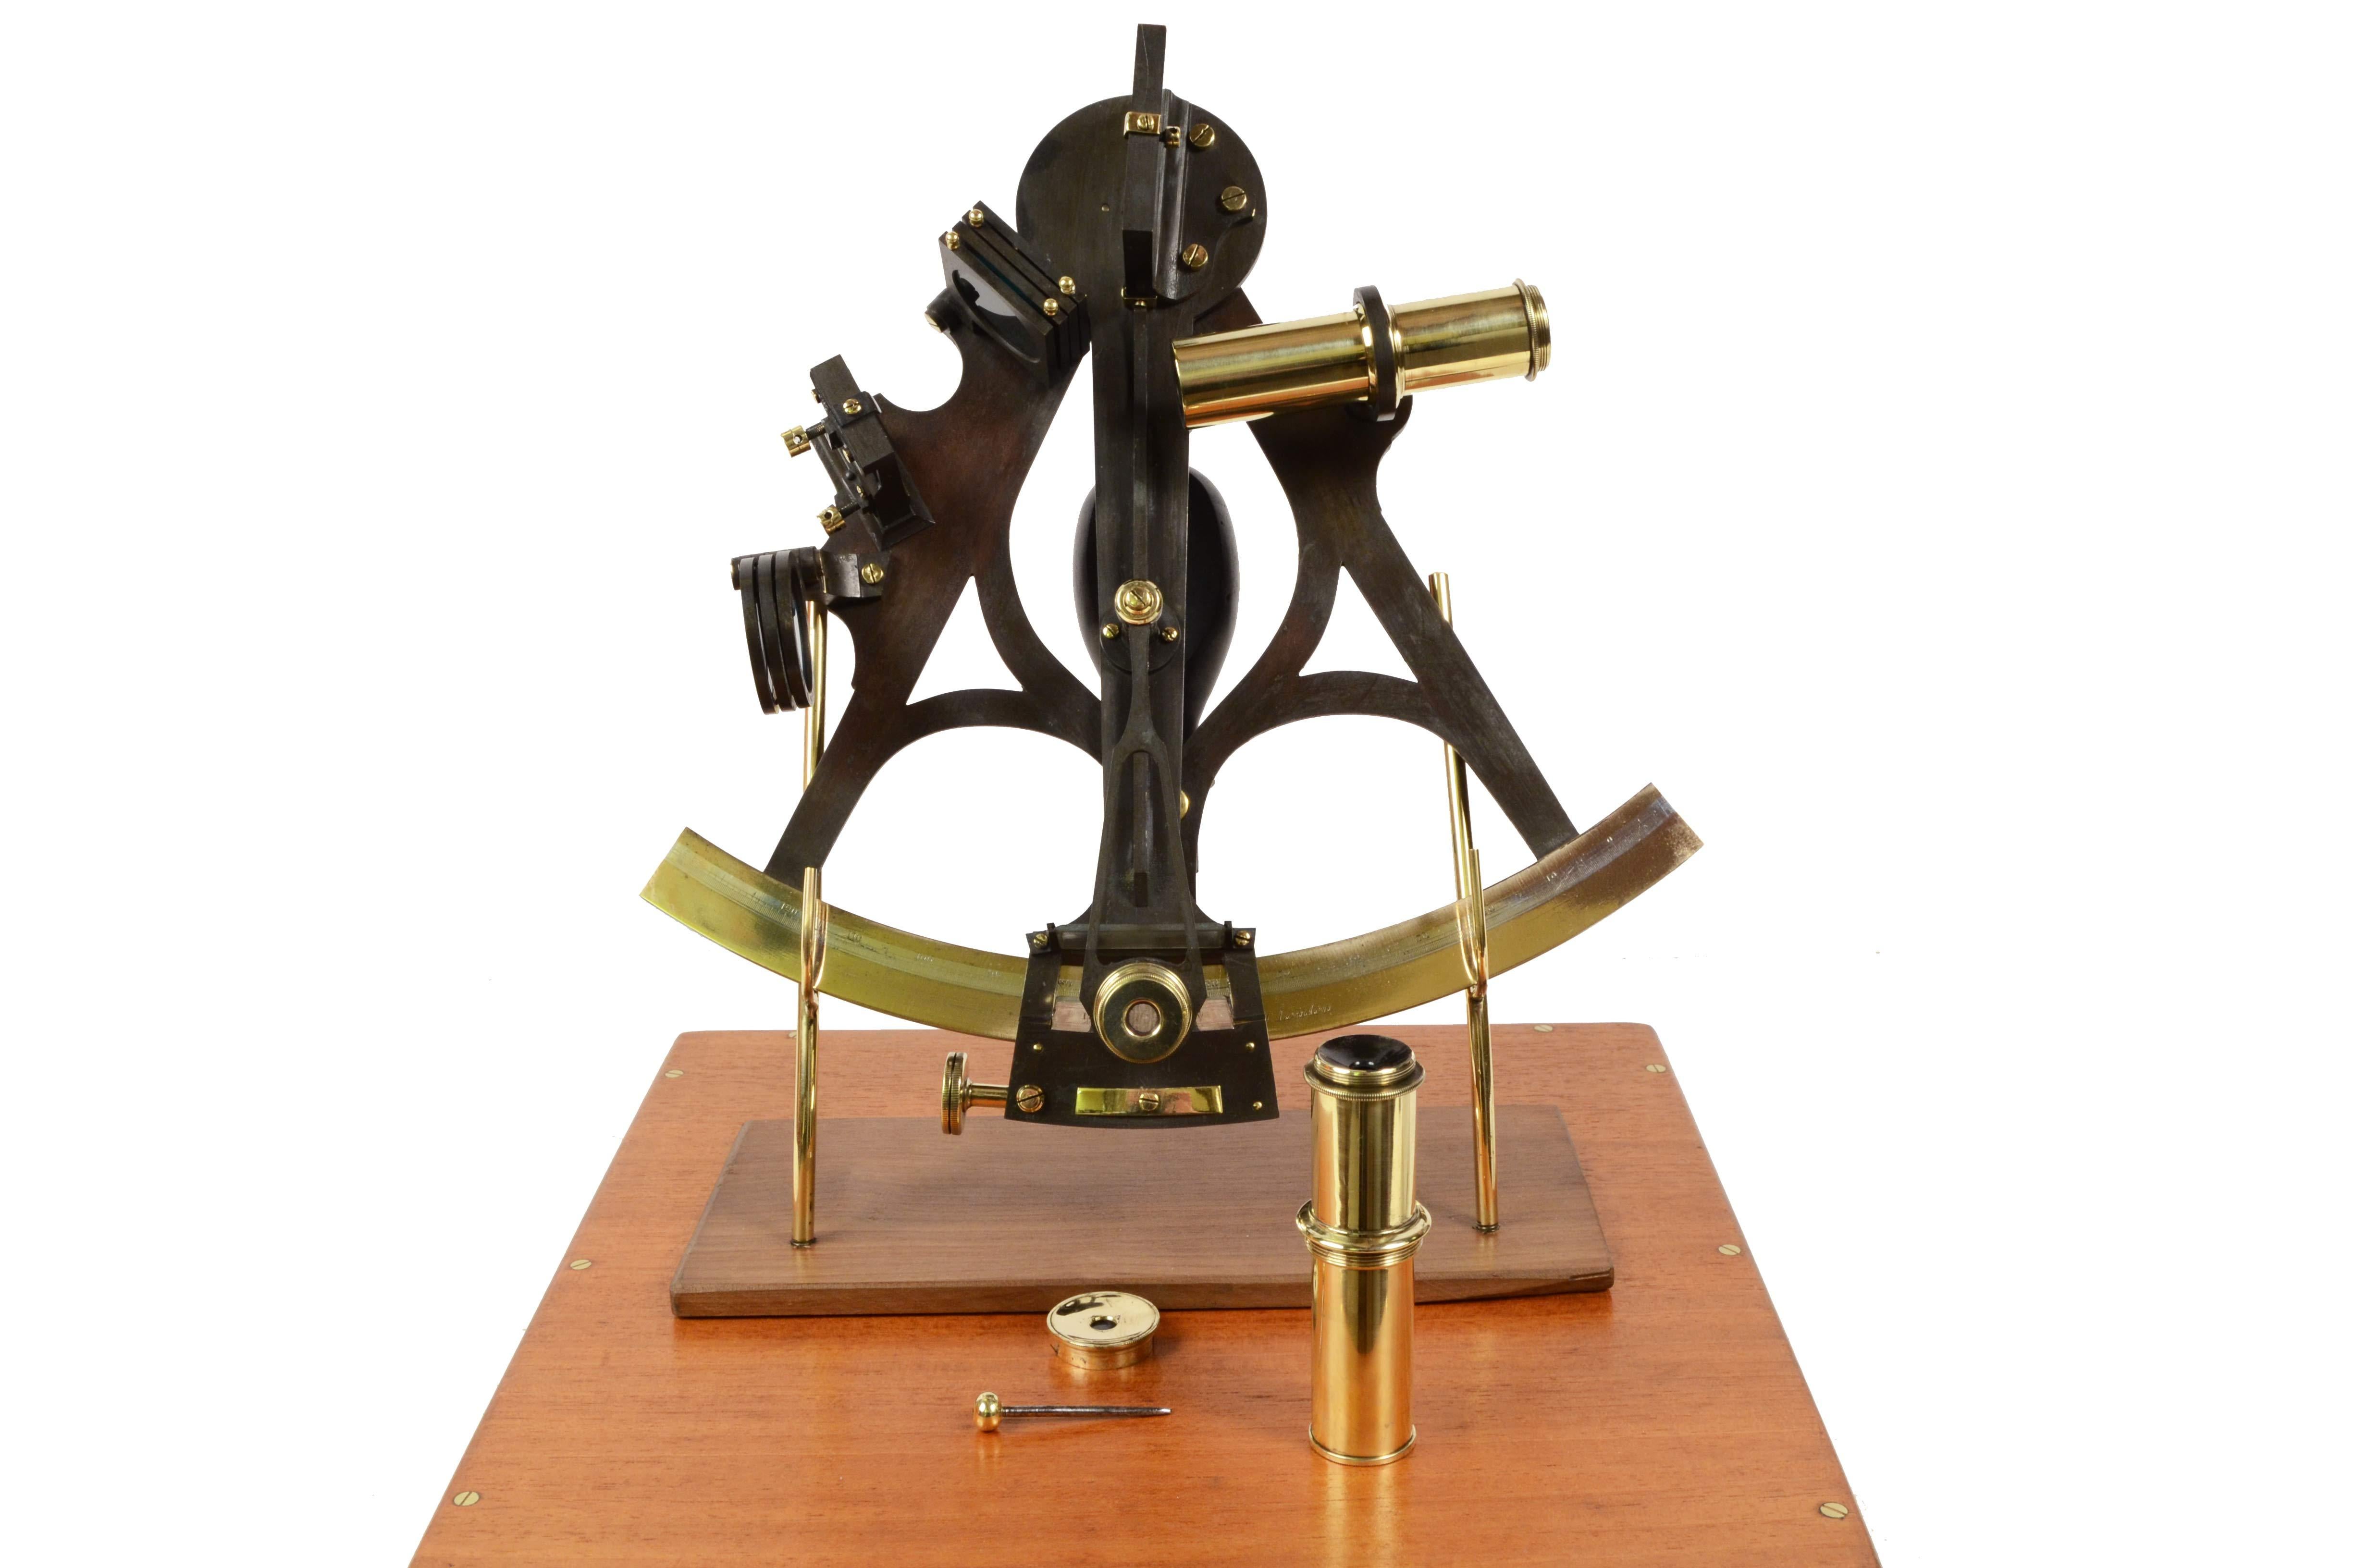 Burnished brass sextant signed Mc Millan & Talbott 13 Tower Hill London of the second half of XIX century complete with lenses and accessories, placed in its beautiful original wood box complete with lock and brass hinges. Flap and vernier made of